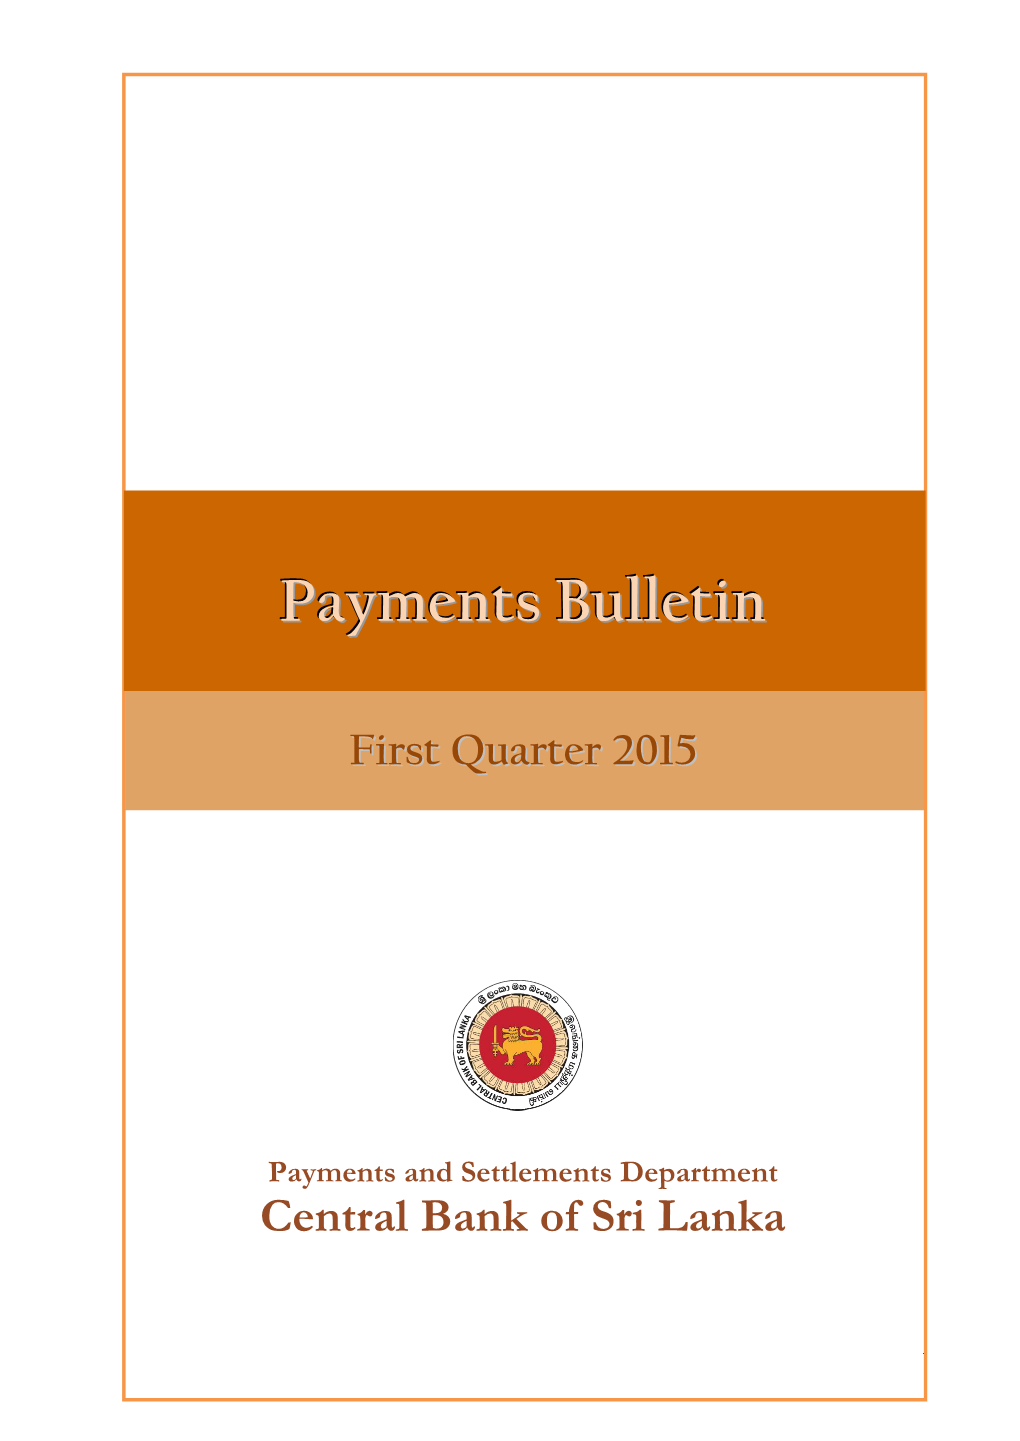 Payments Bulletin - First Quarter 2015 Page 1